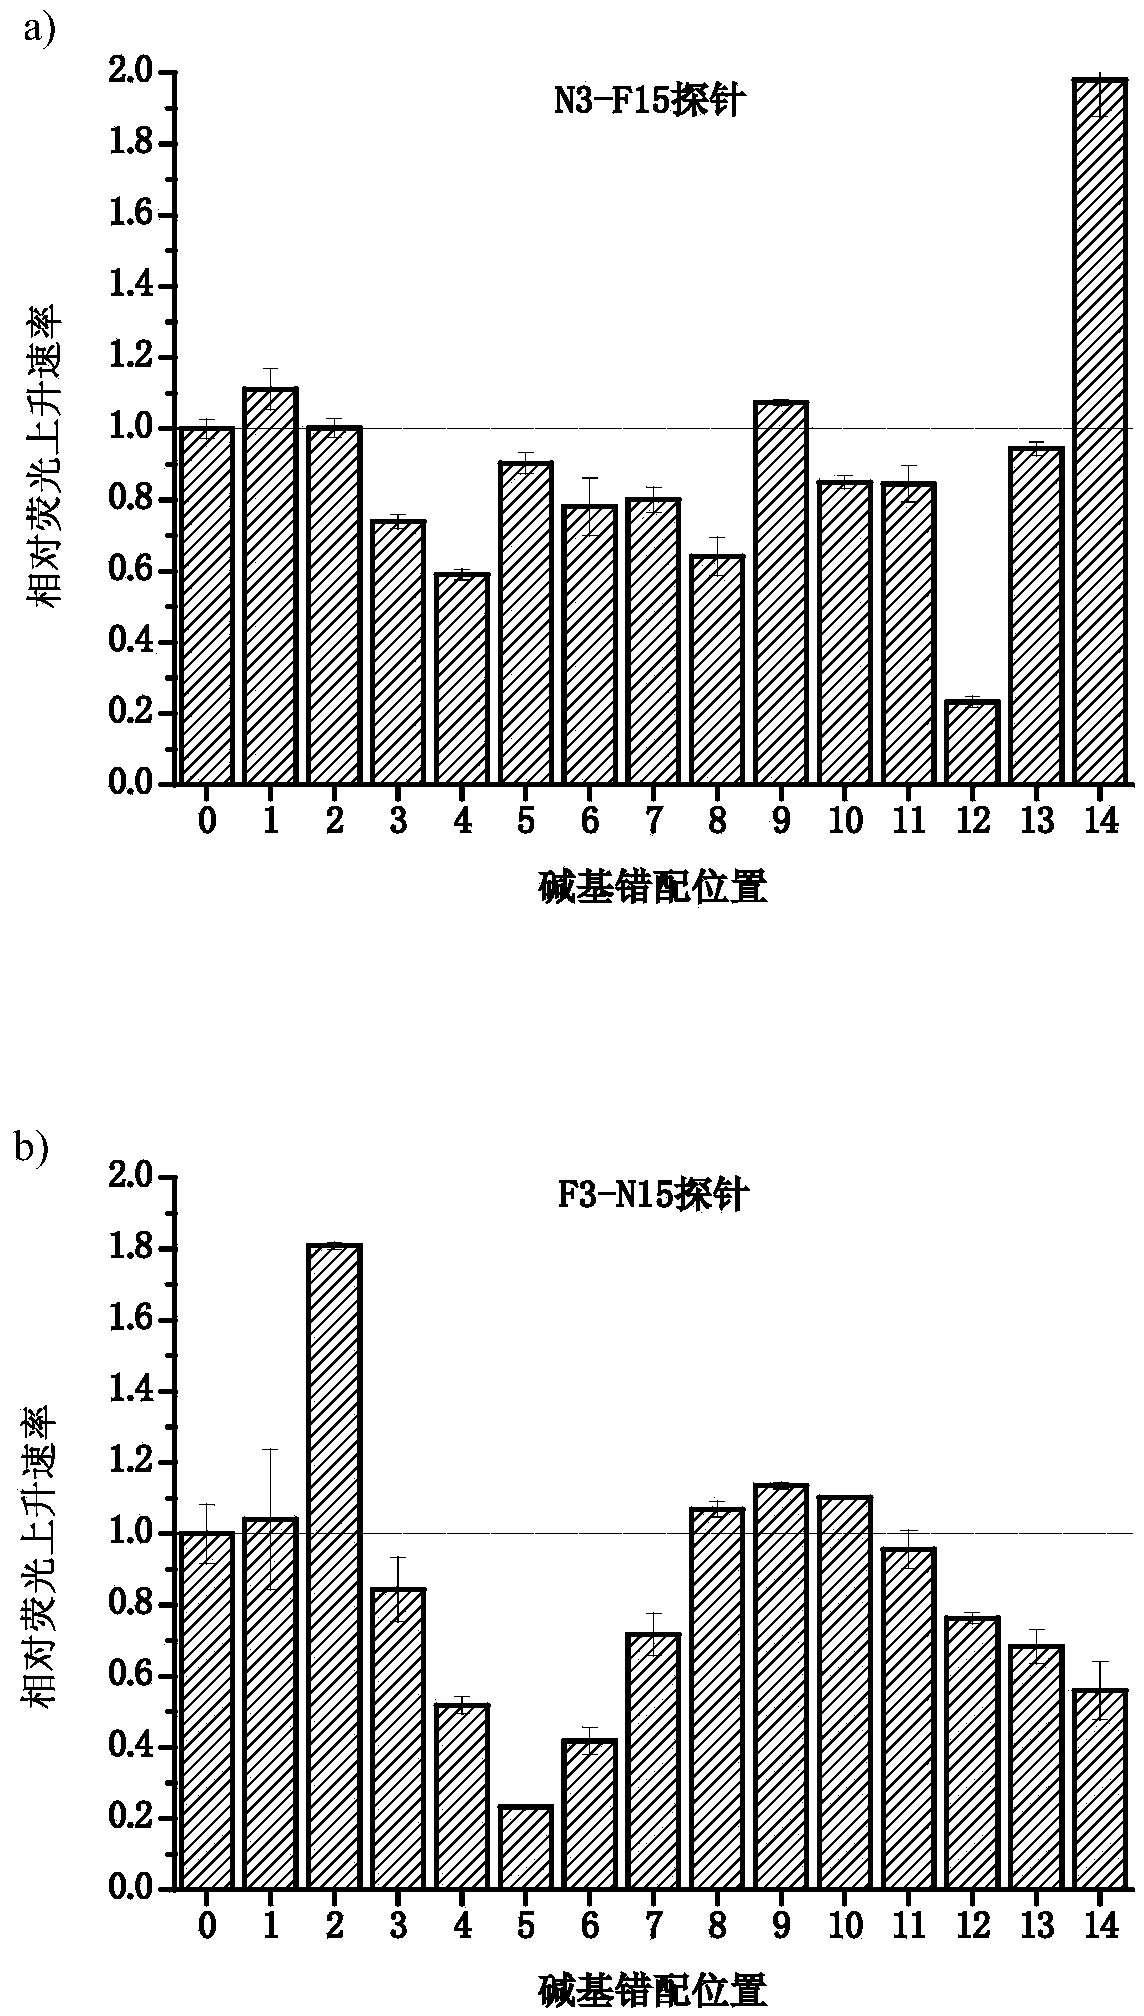 Method for signal amplification and detection on target deoxyribonucleic acid (DNA) sequence at normal temperature